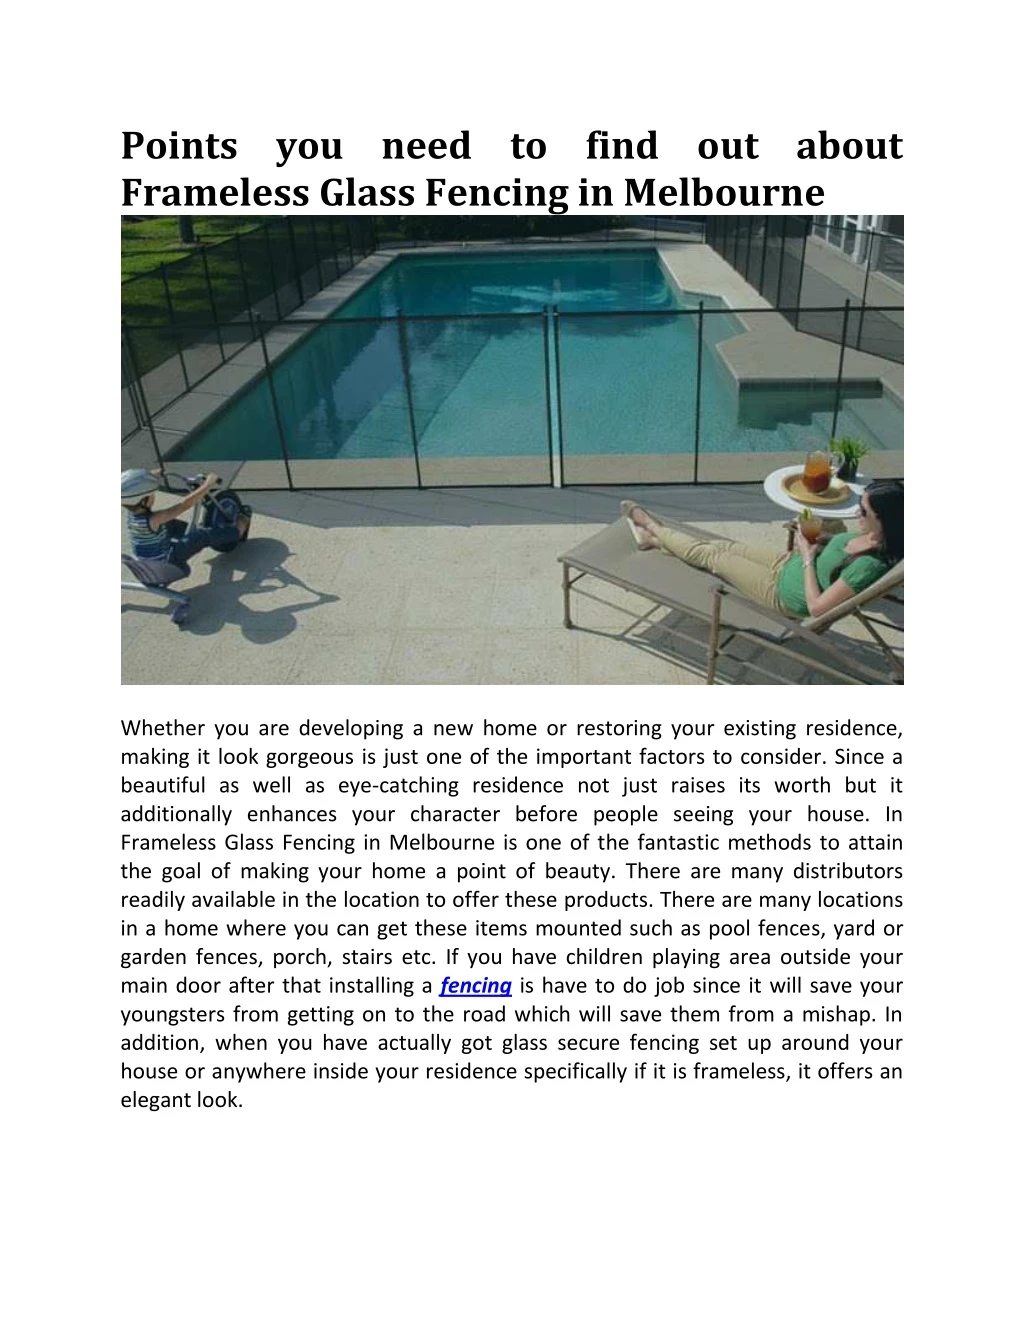 points you need to find out about frameless glass